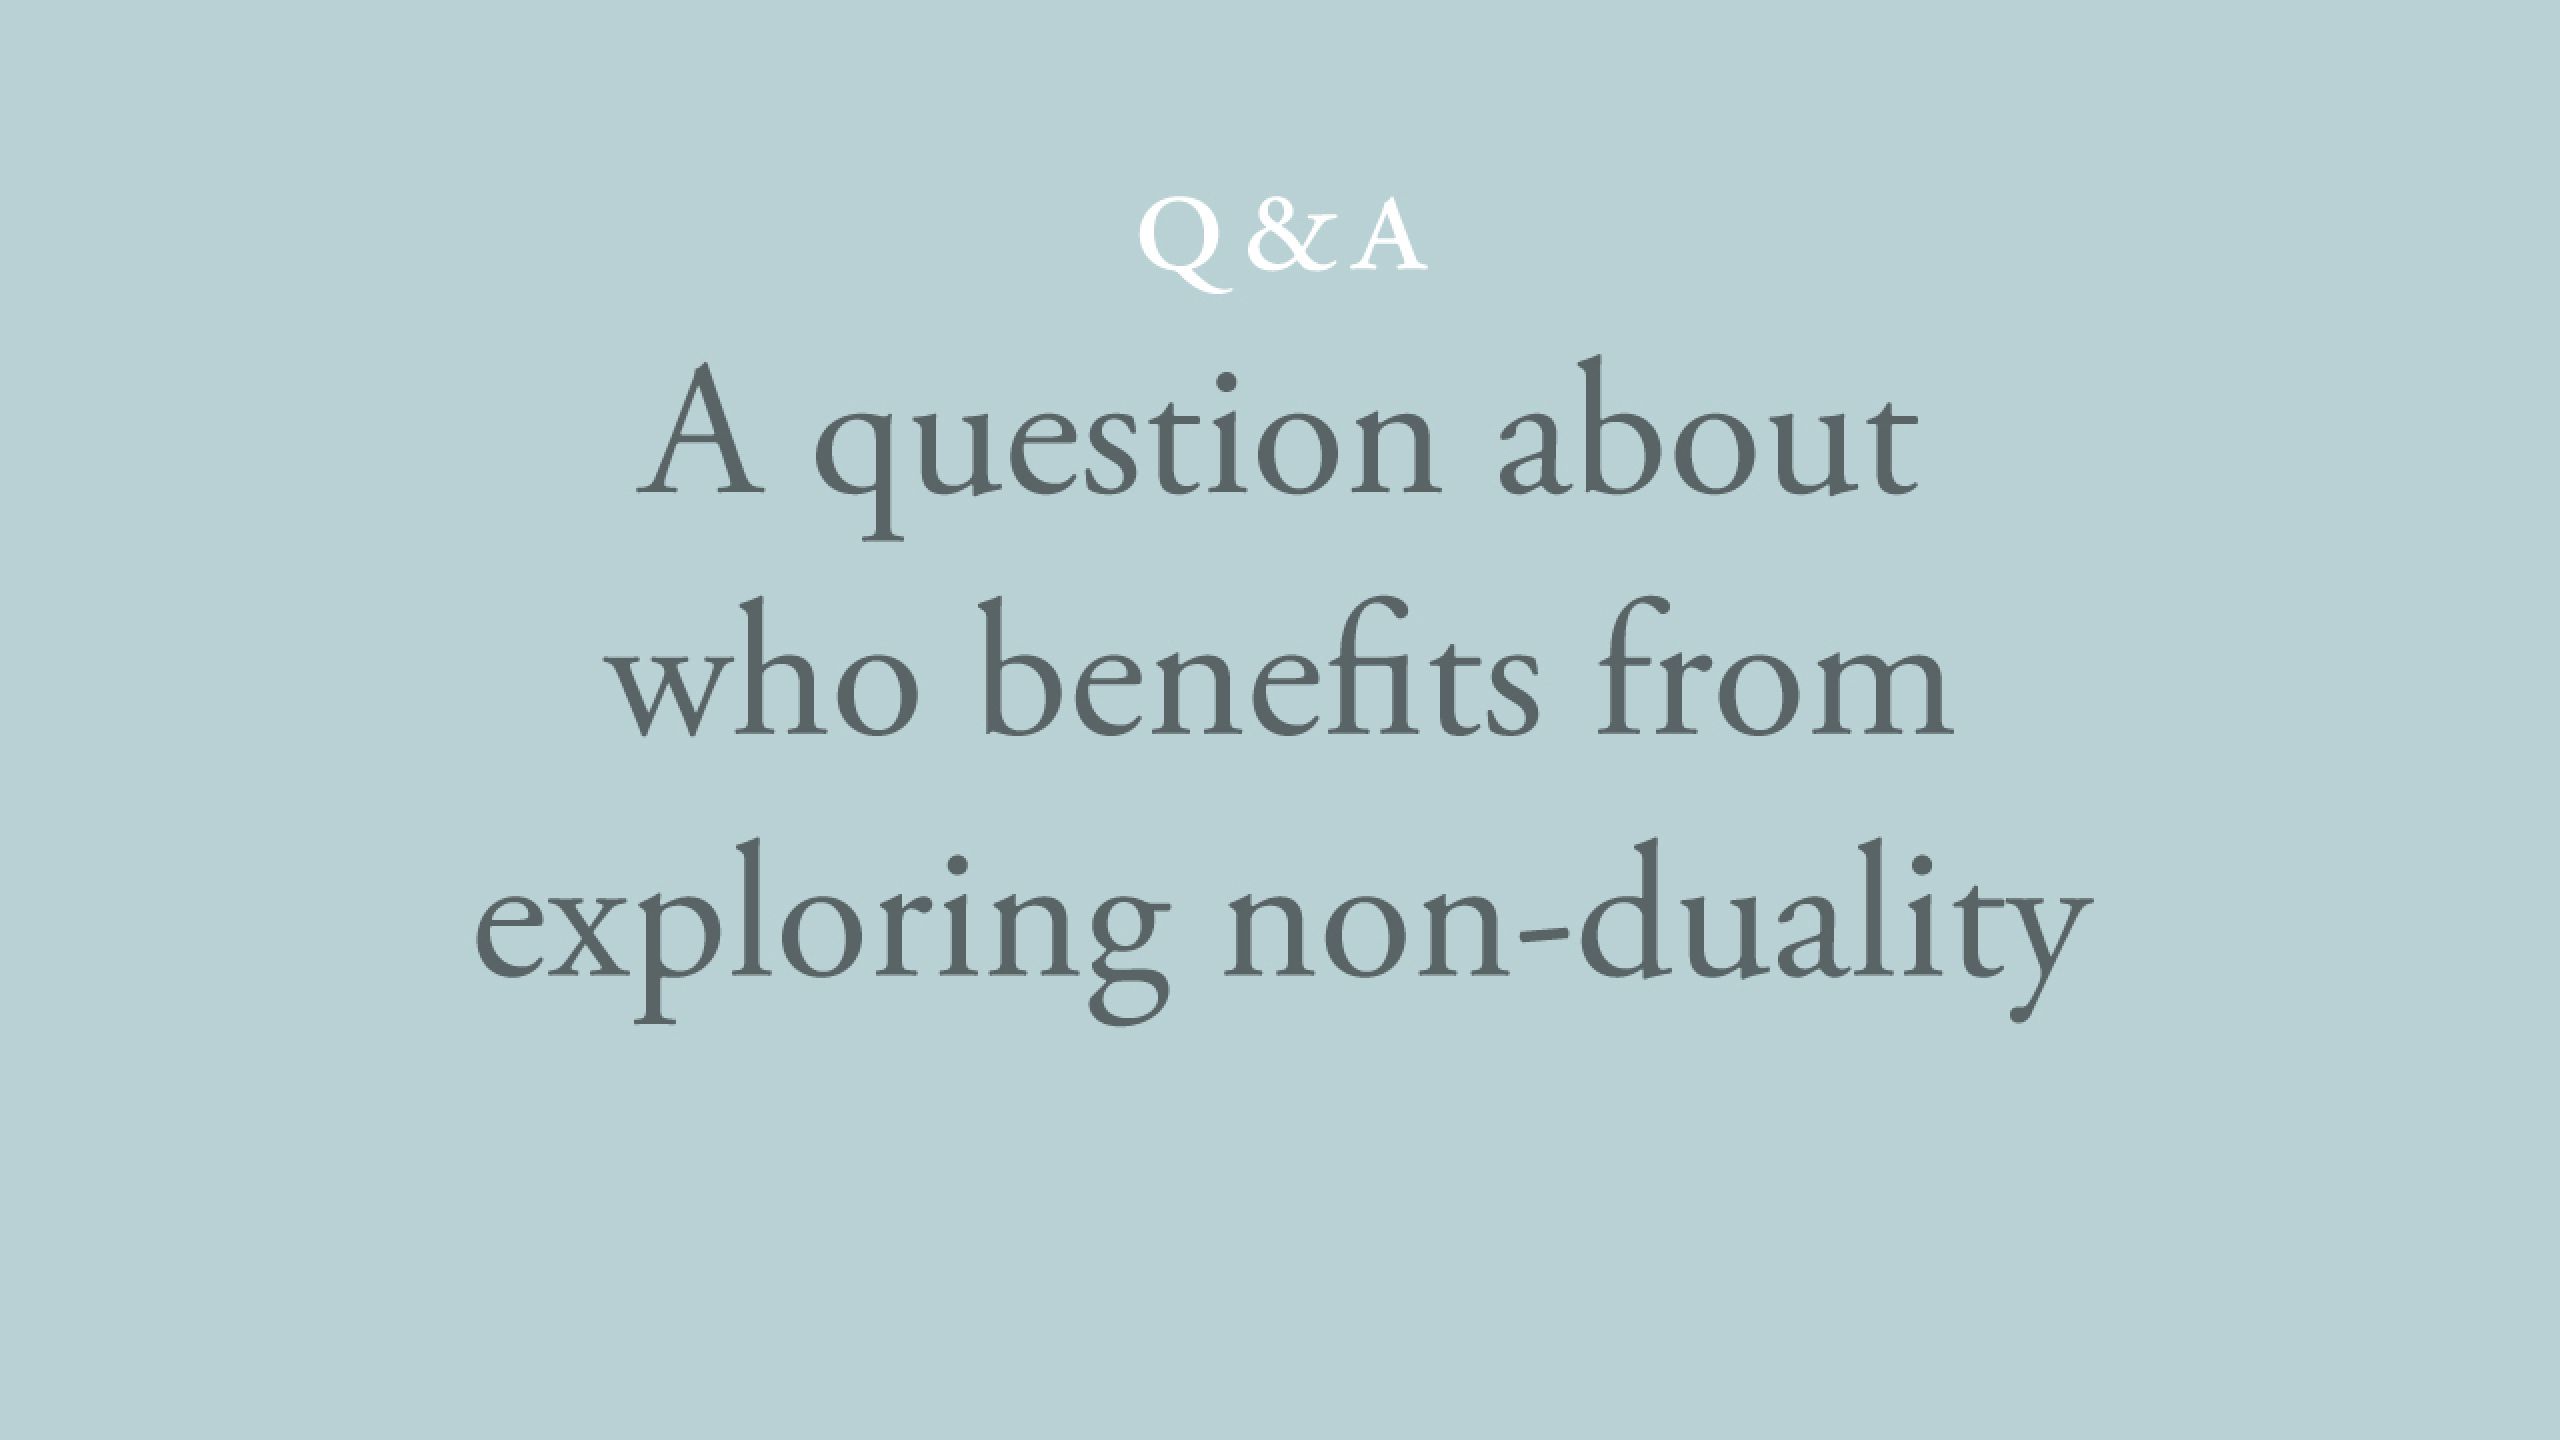 Who benefits from exploring non-duality? 